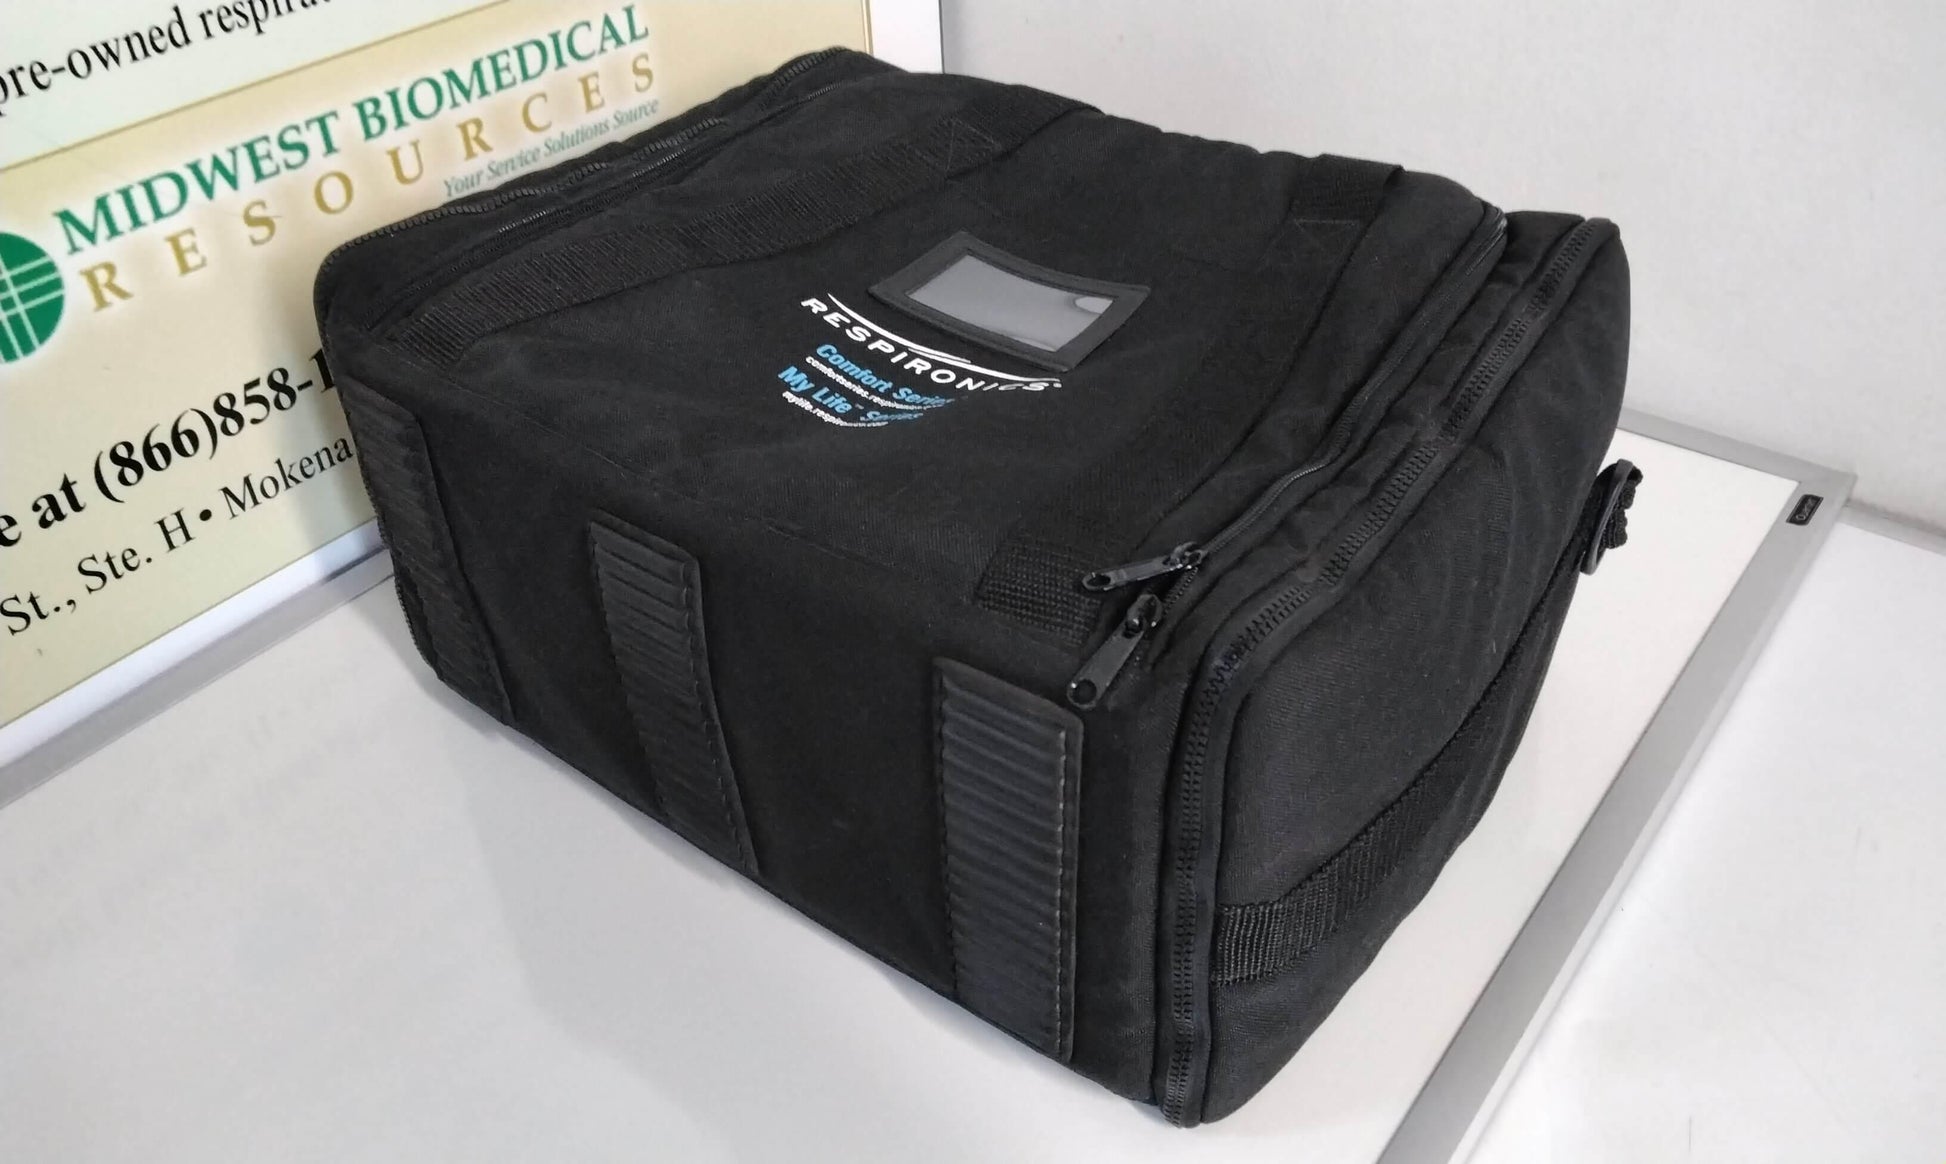 USED Philips Respironics Comfort My Life Series Travel Bag with Free Shipping and Warranty - MBR Medicals